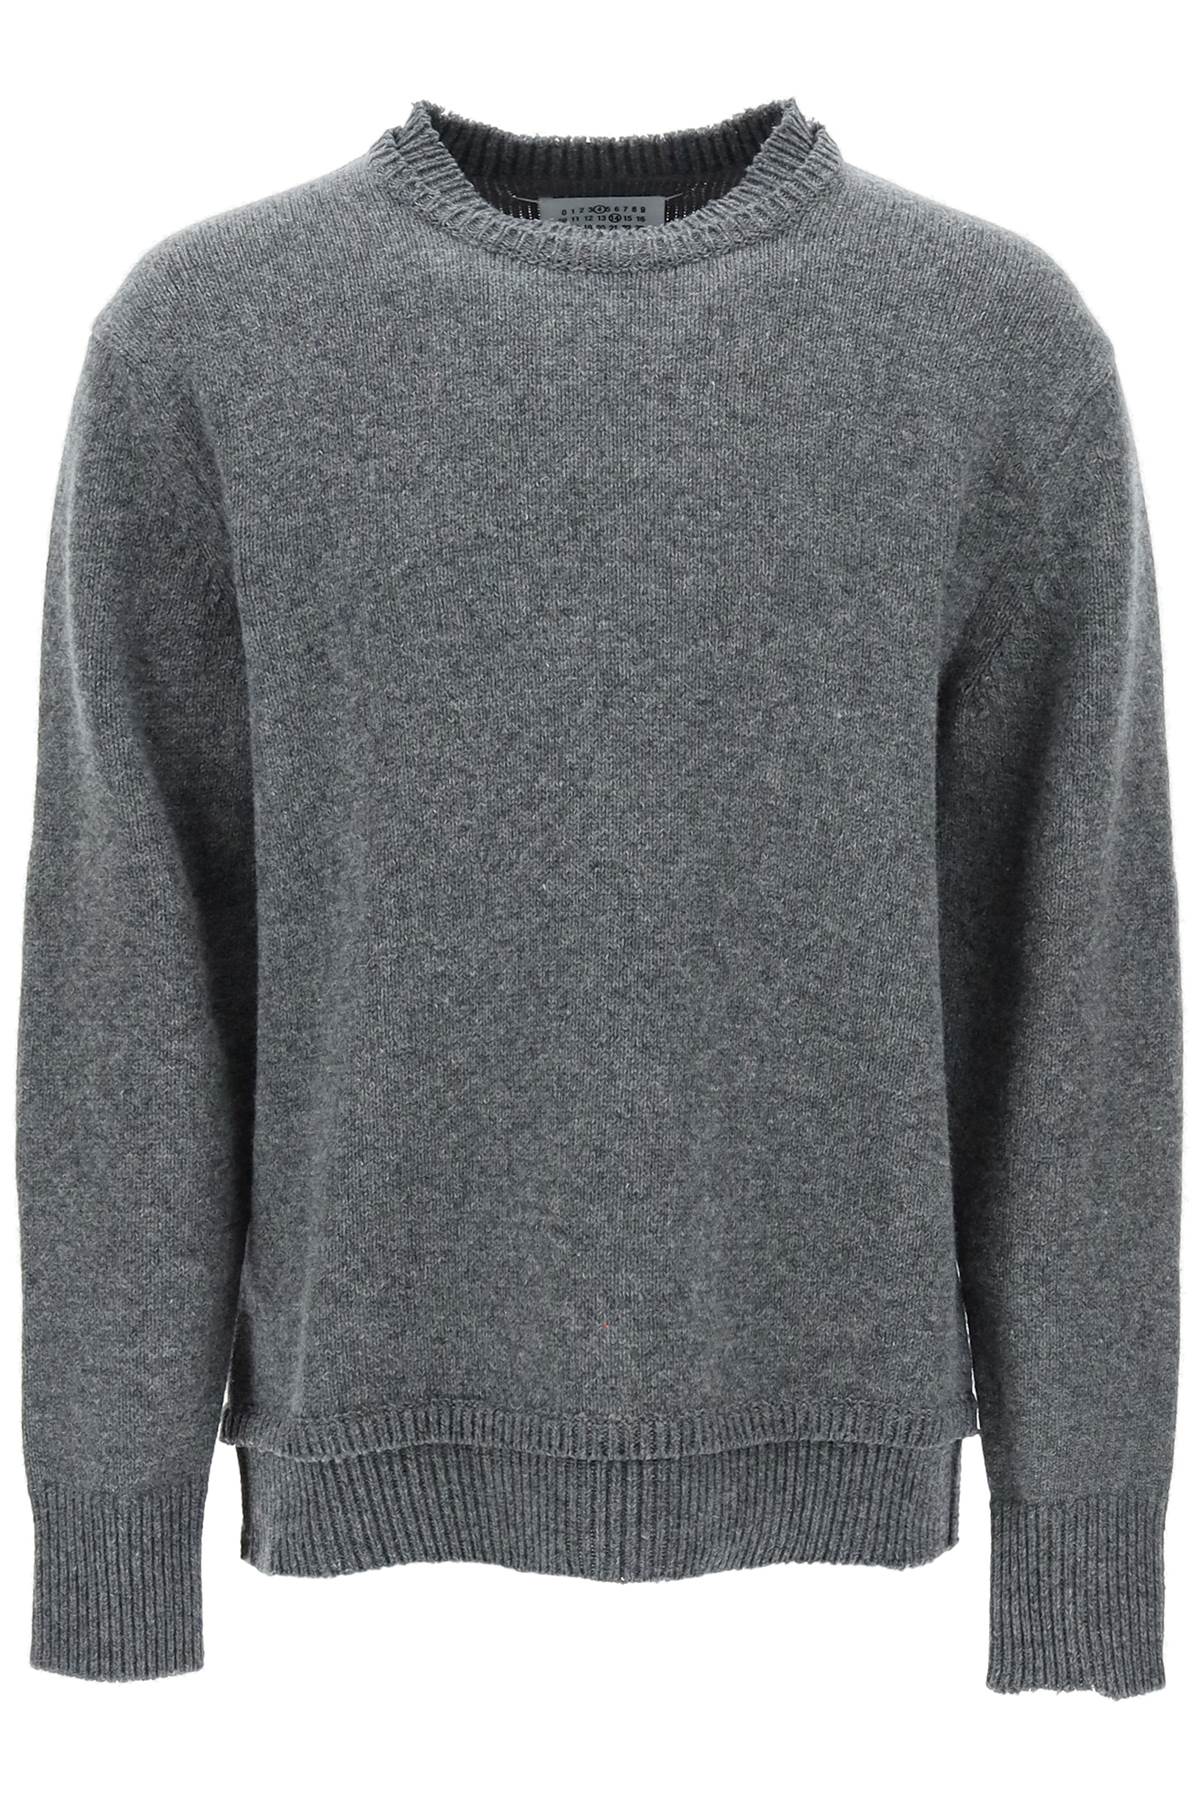 Maison Margiela Crew Neck Sweater With Elbow Patches